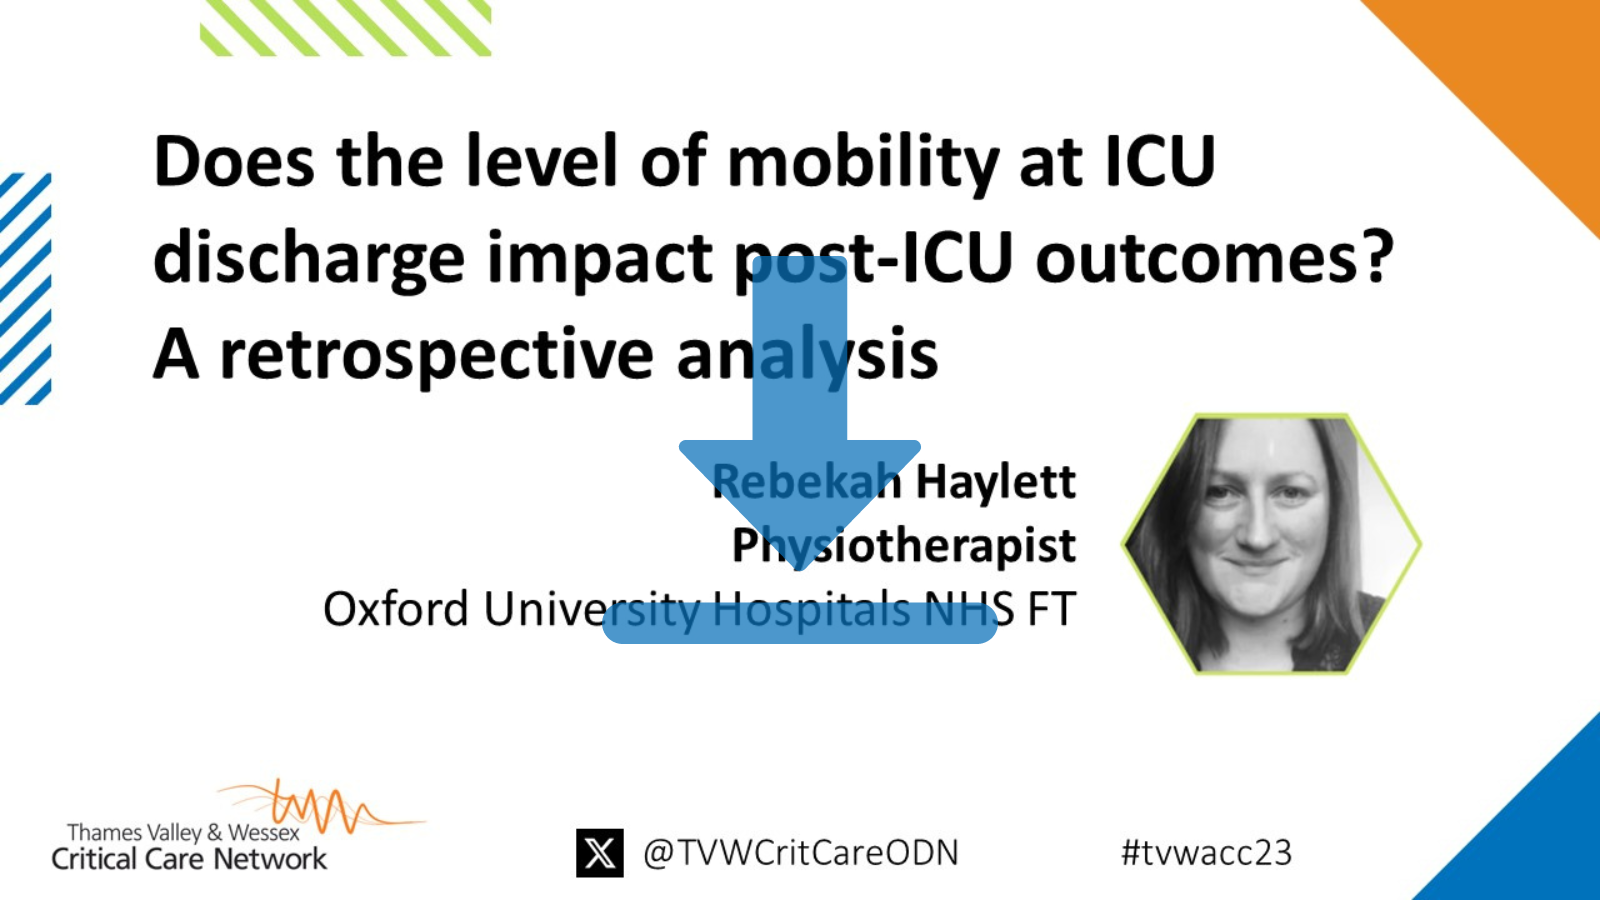 Does the level of mobility at ICU discharge impact post-ICU outcomes? A retrospective analysis